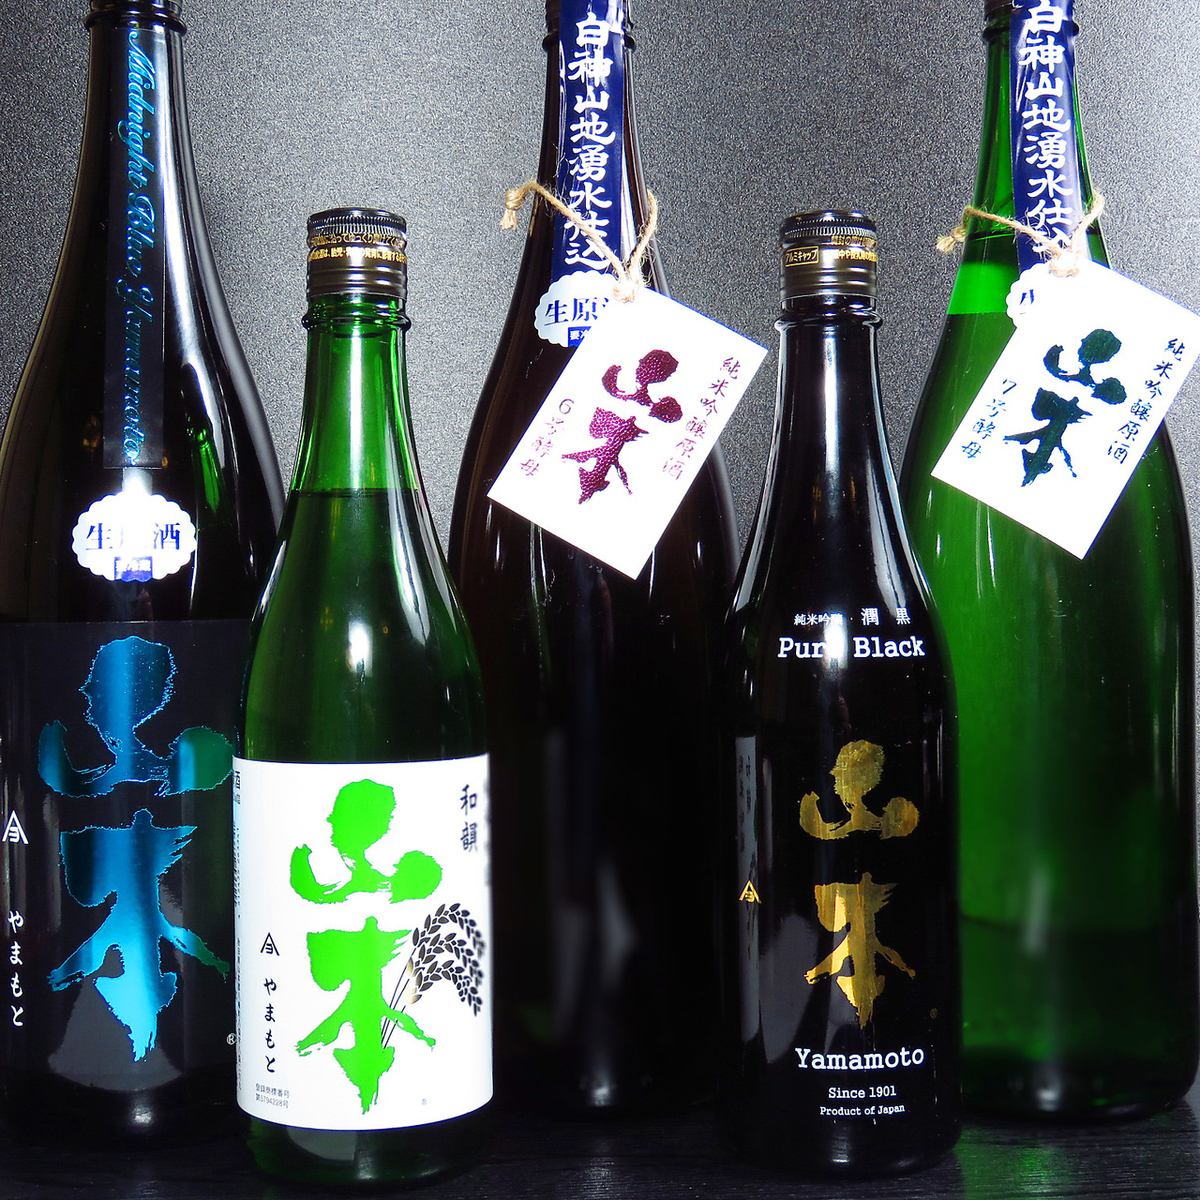 The charm of Kushizen is that you can enjoy over 1800 types of drinks including sake and authentic shochu.